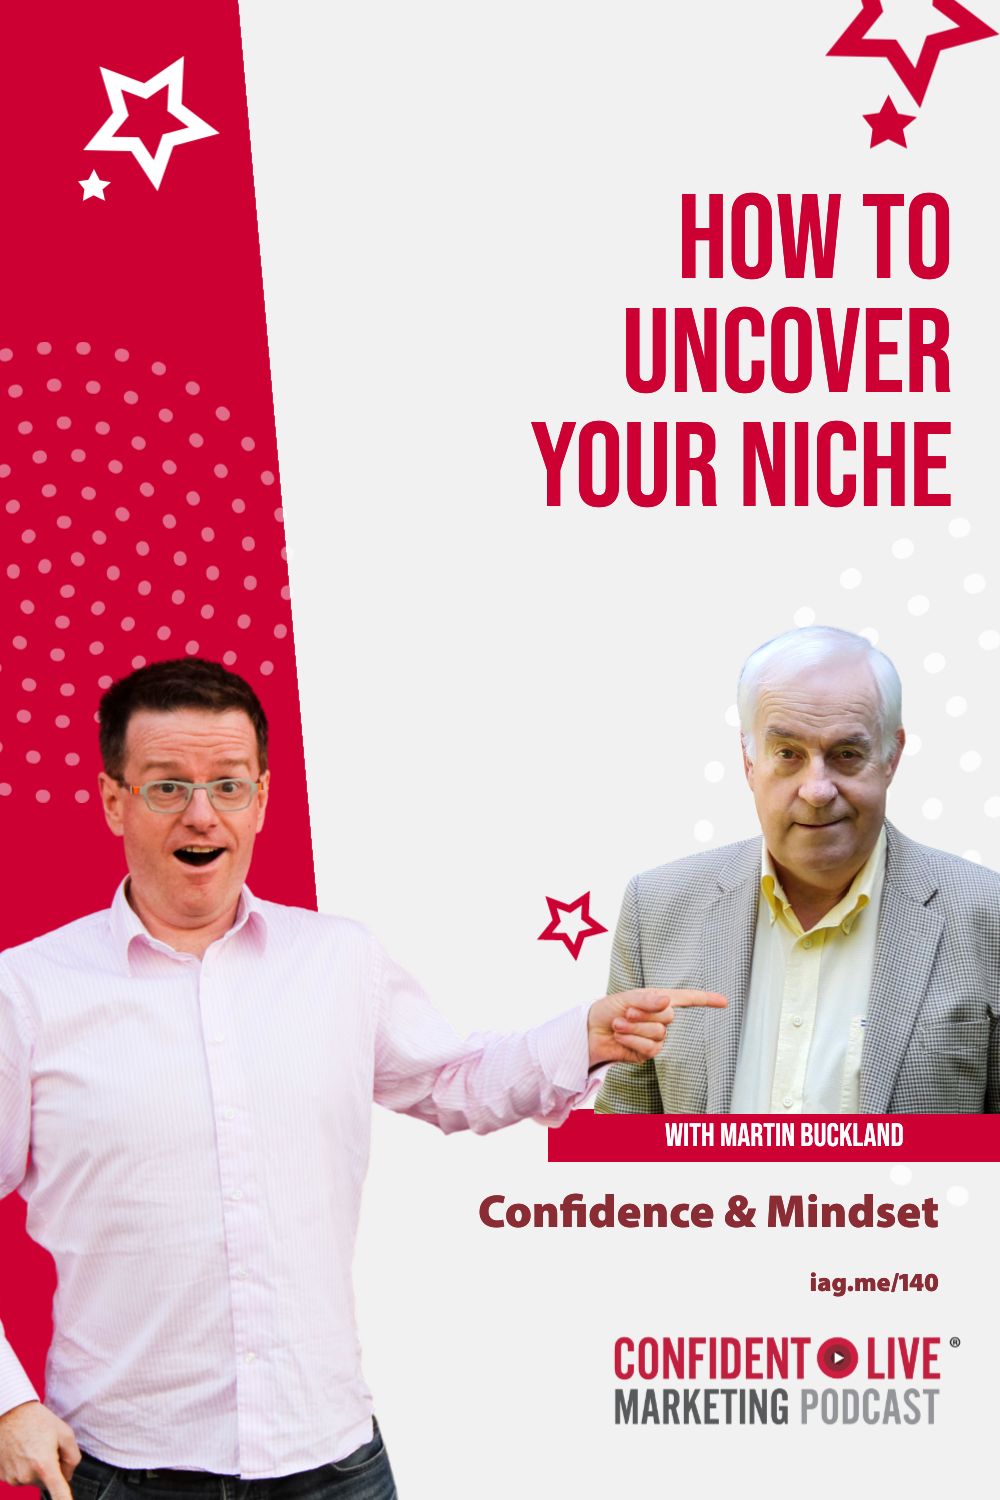 How to Uncover Your Niche